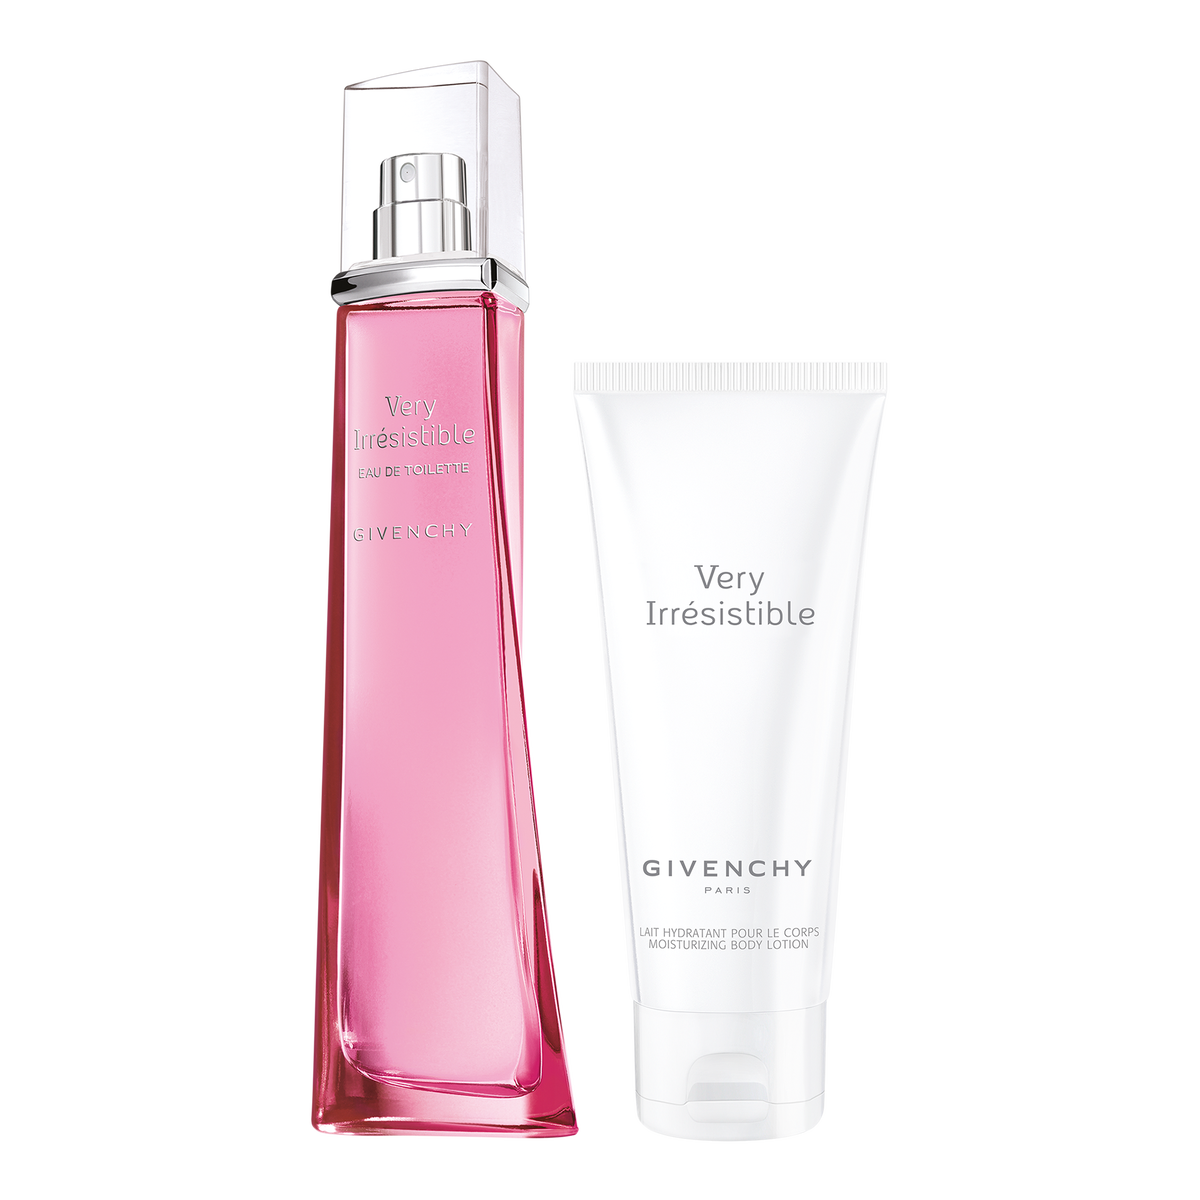 Givenchy irresistible toilette. Духи Givenchy very irresistible. Givenchy very irresistible Eau de Parfum. Givenchy very irresistible Eau de Toilette. Парфюмерная вода Givenchy very irresistible.